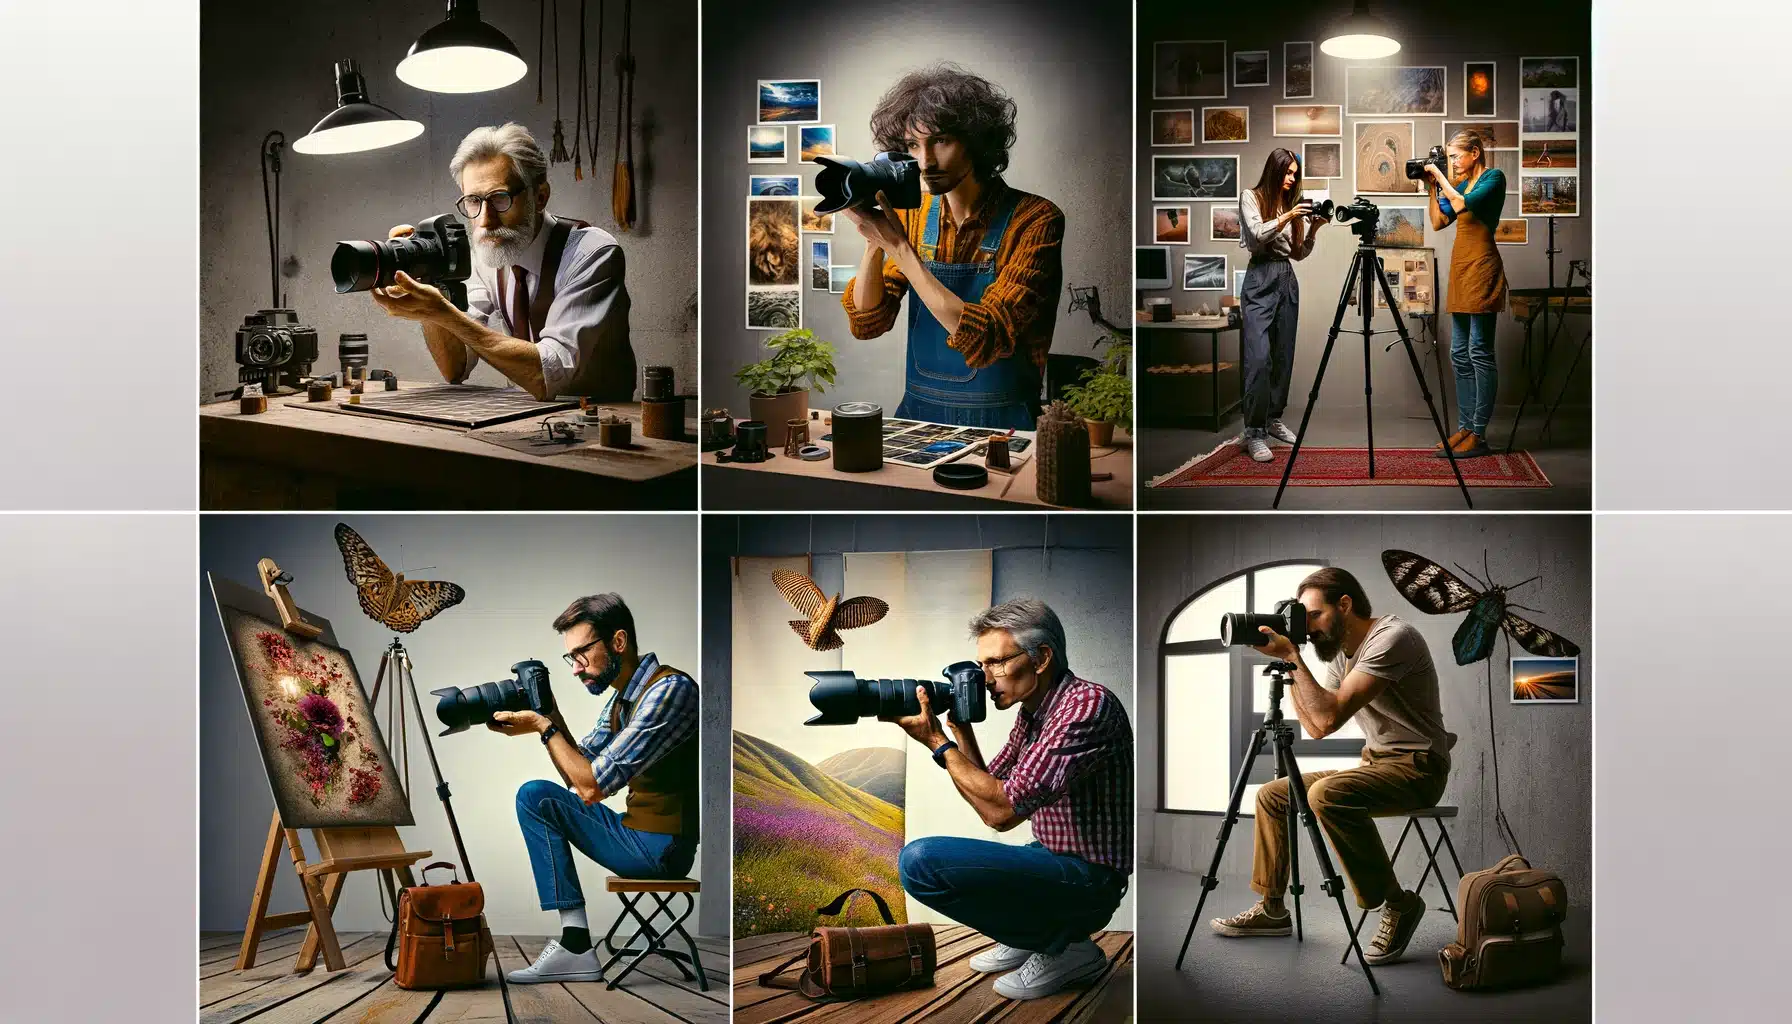 Different photographers in a studio, each demonstrating a different style of photography including fine art, portrait, landscape, wildlife, and street photography, with relevant equipment and setups.